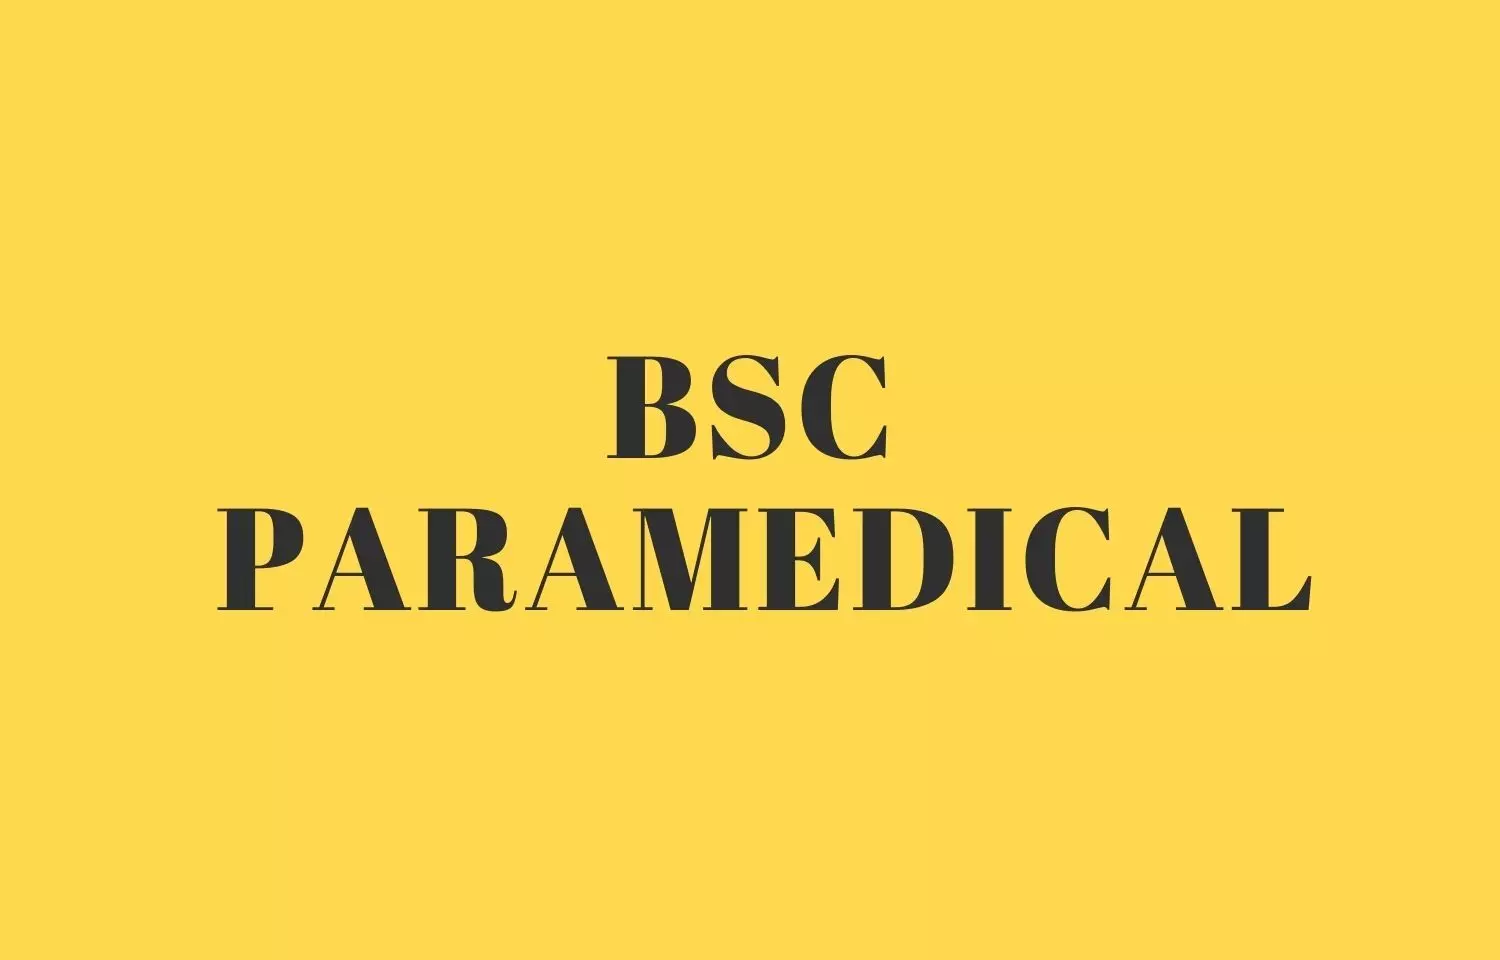 GMC Jammu Begins 3 Years BSc Paramedical Courses In 8 Departments